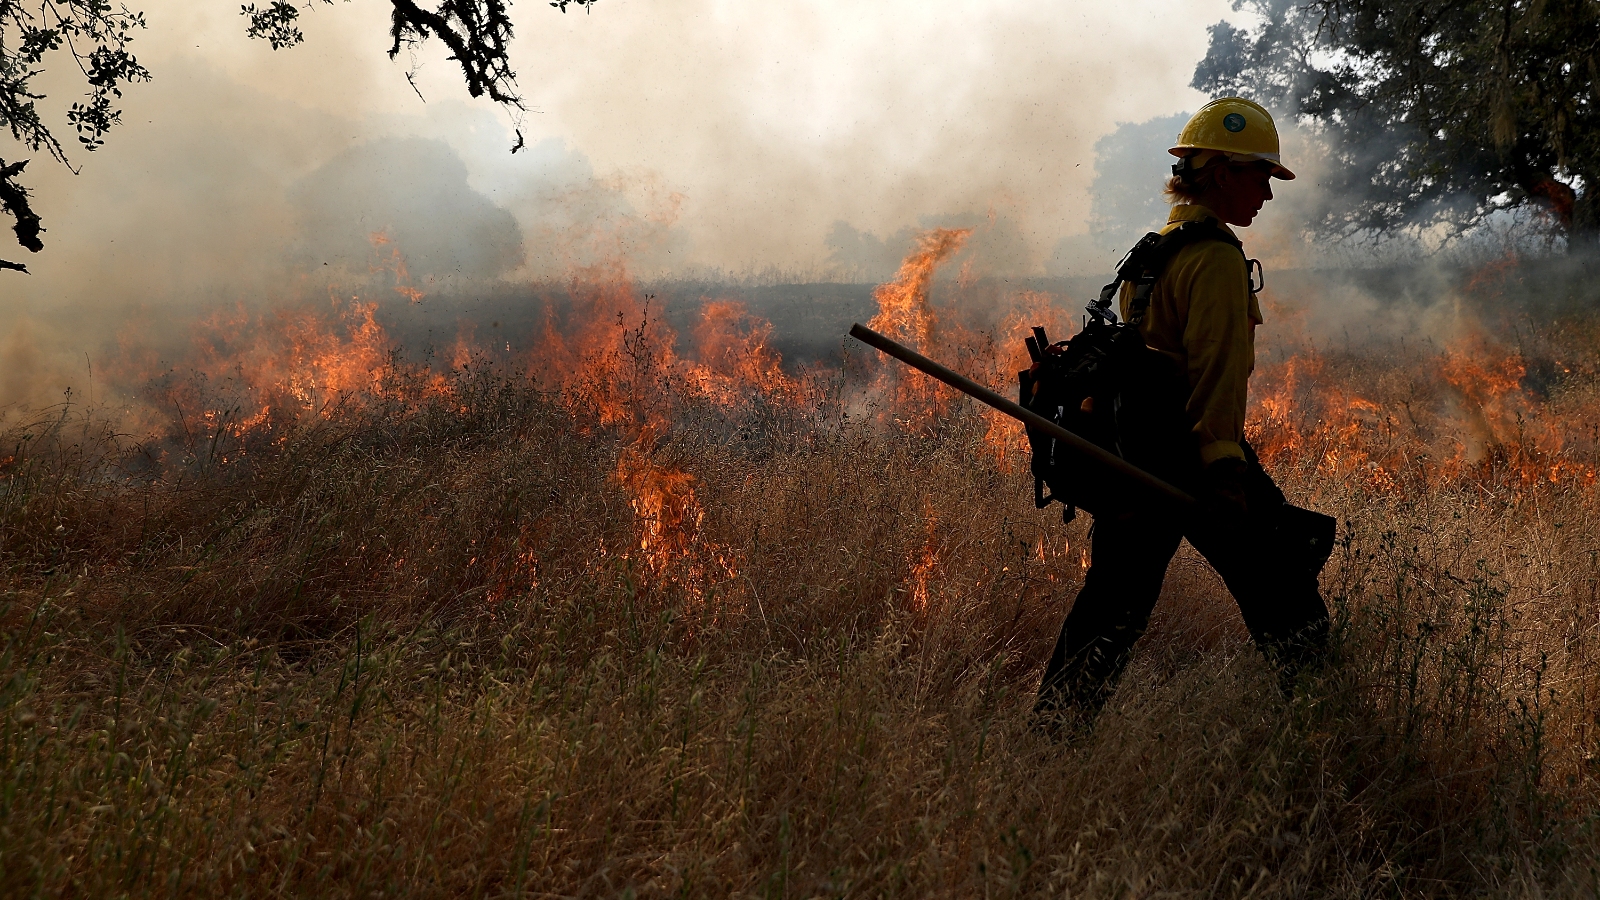 Controlled burns can provide years of protection against wildfires, new study shows